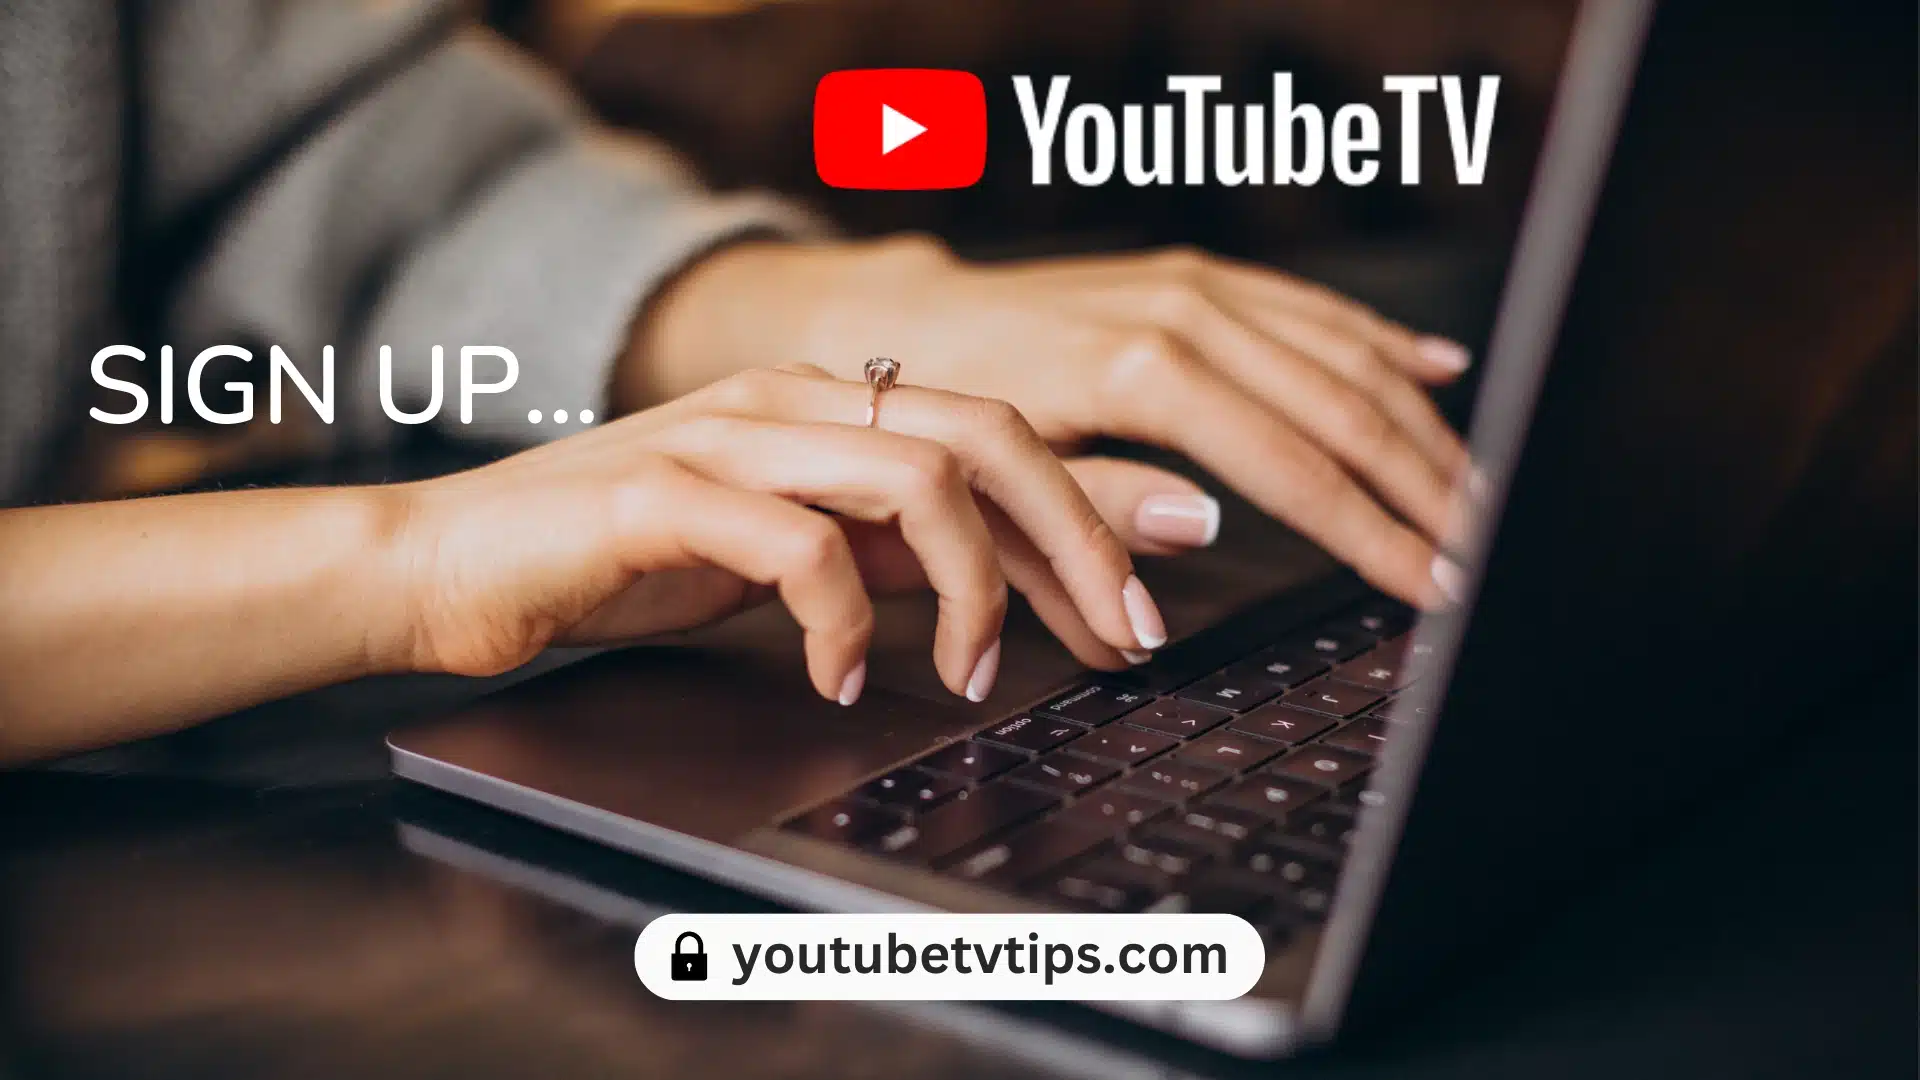 How to Sign Up for YouTubeTV